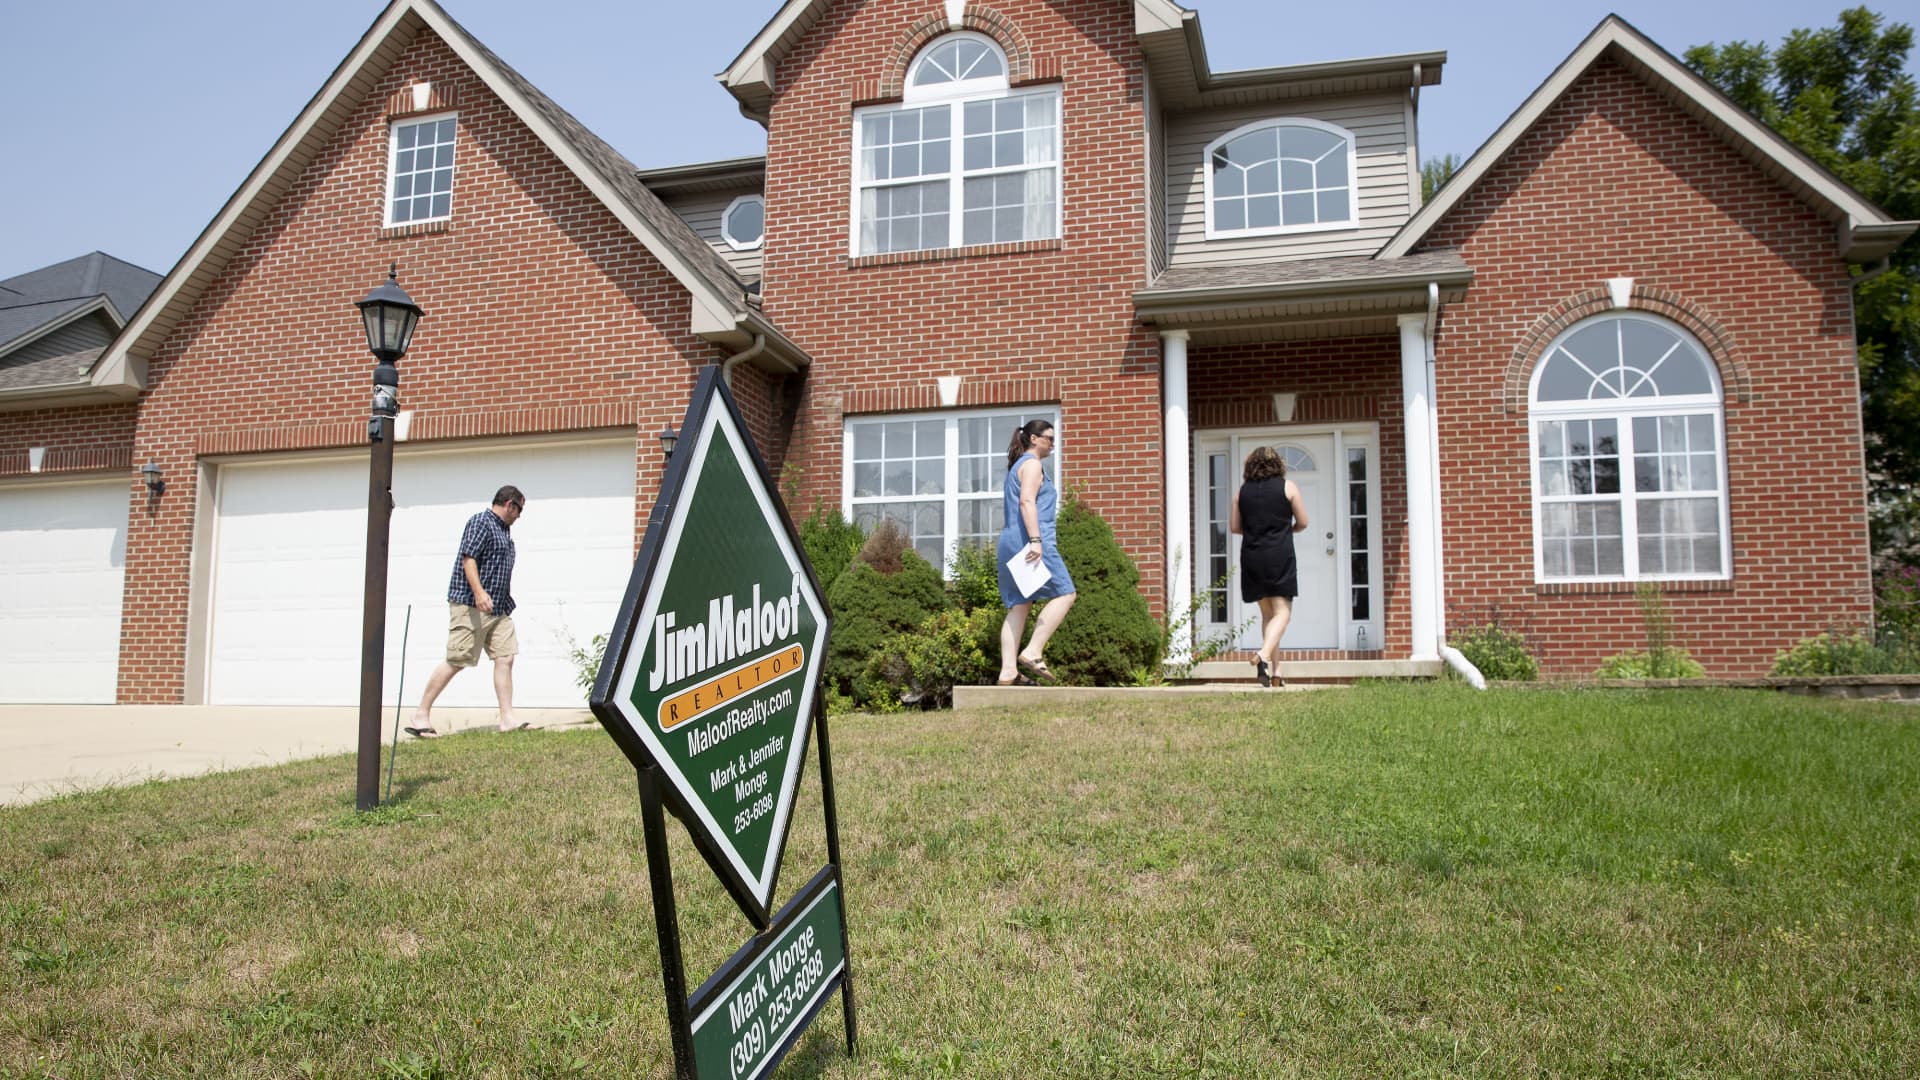 Mortgage refinance demand plunges 14%, as interest rates spike higher